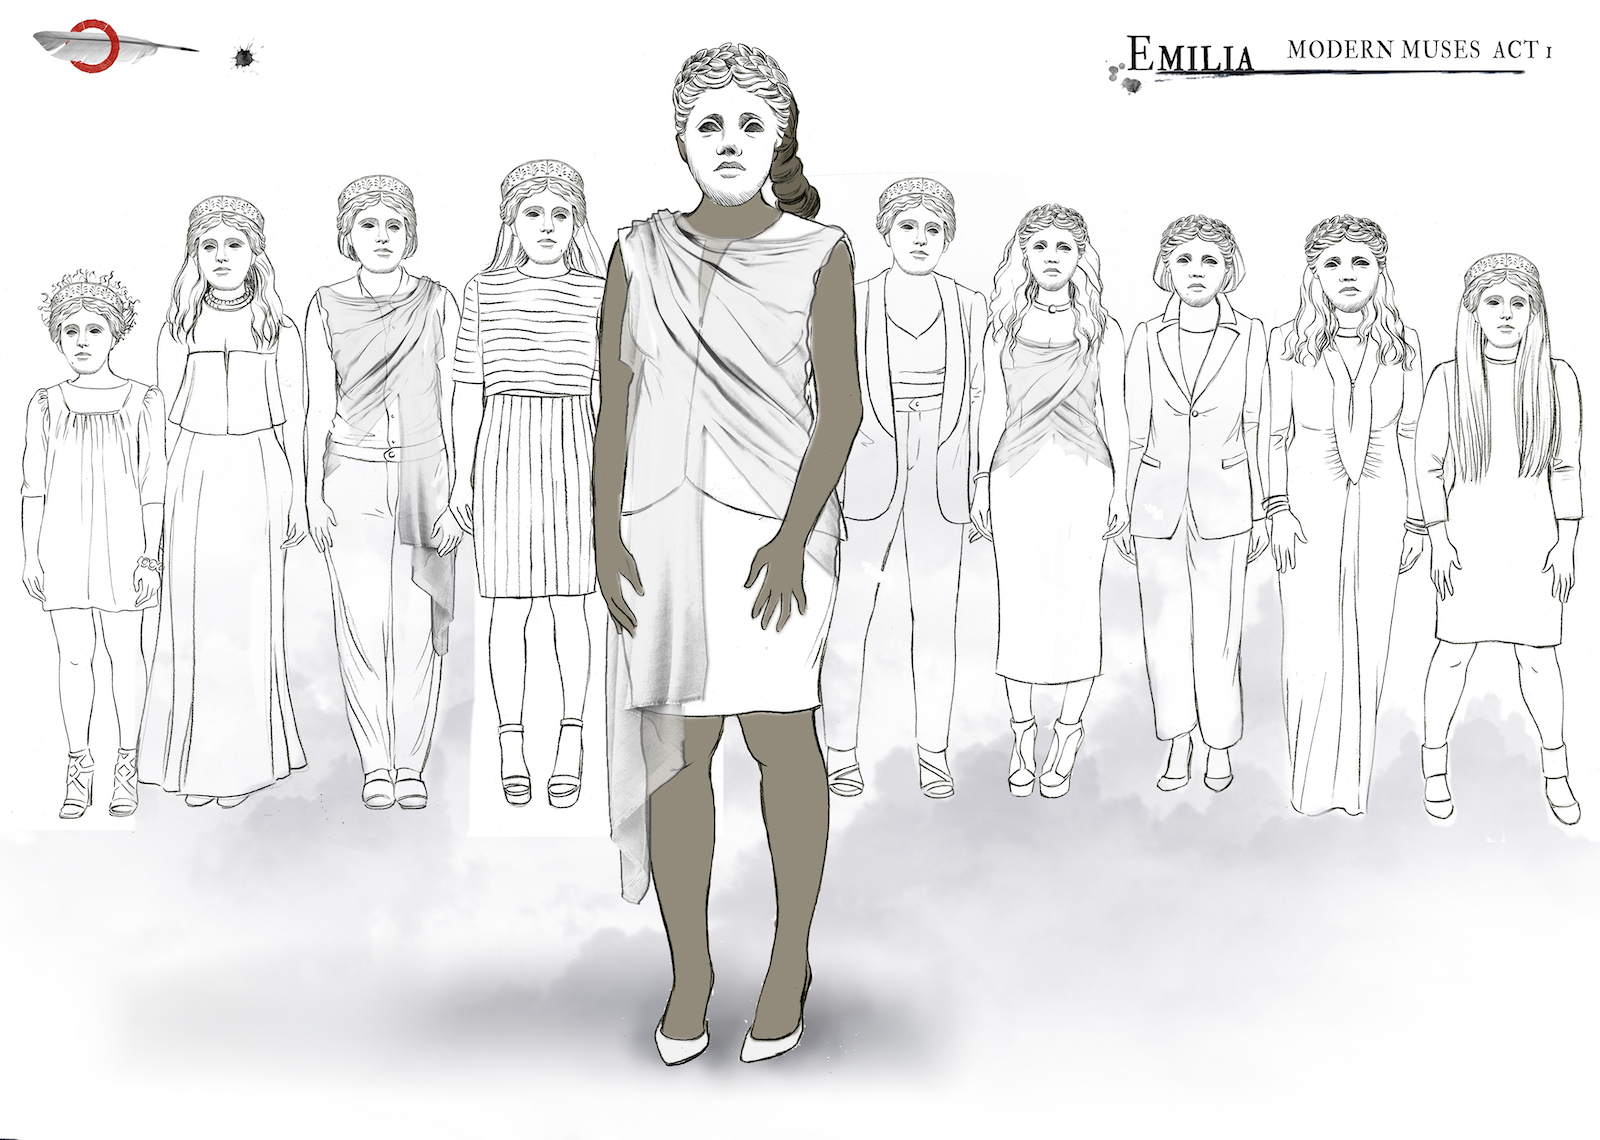 Outline sketches of costume design shows 10 different outfits